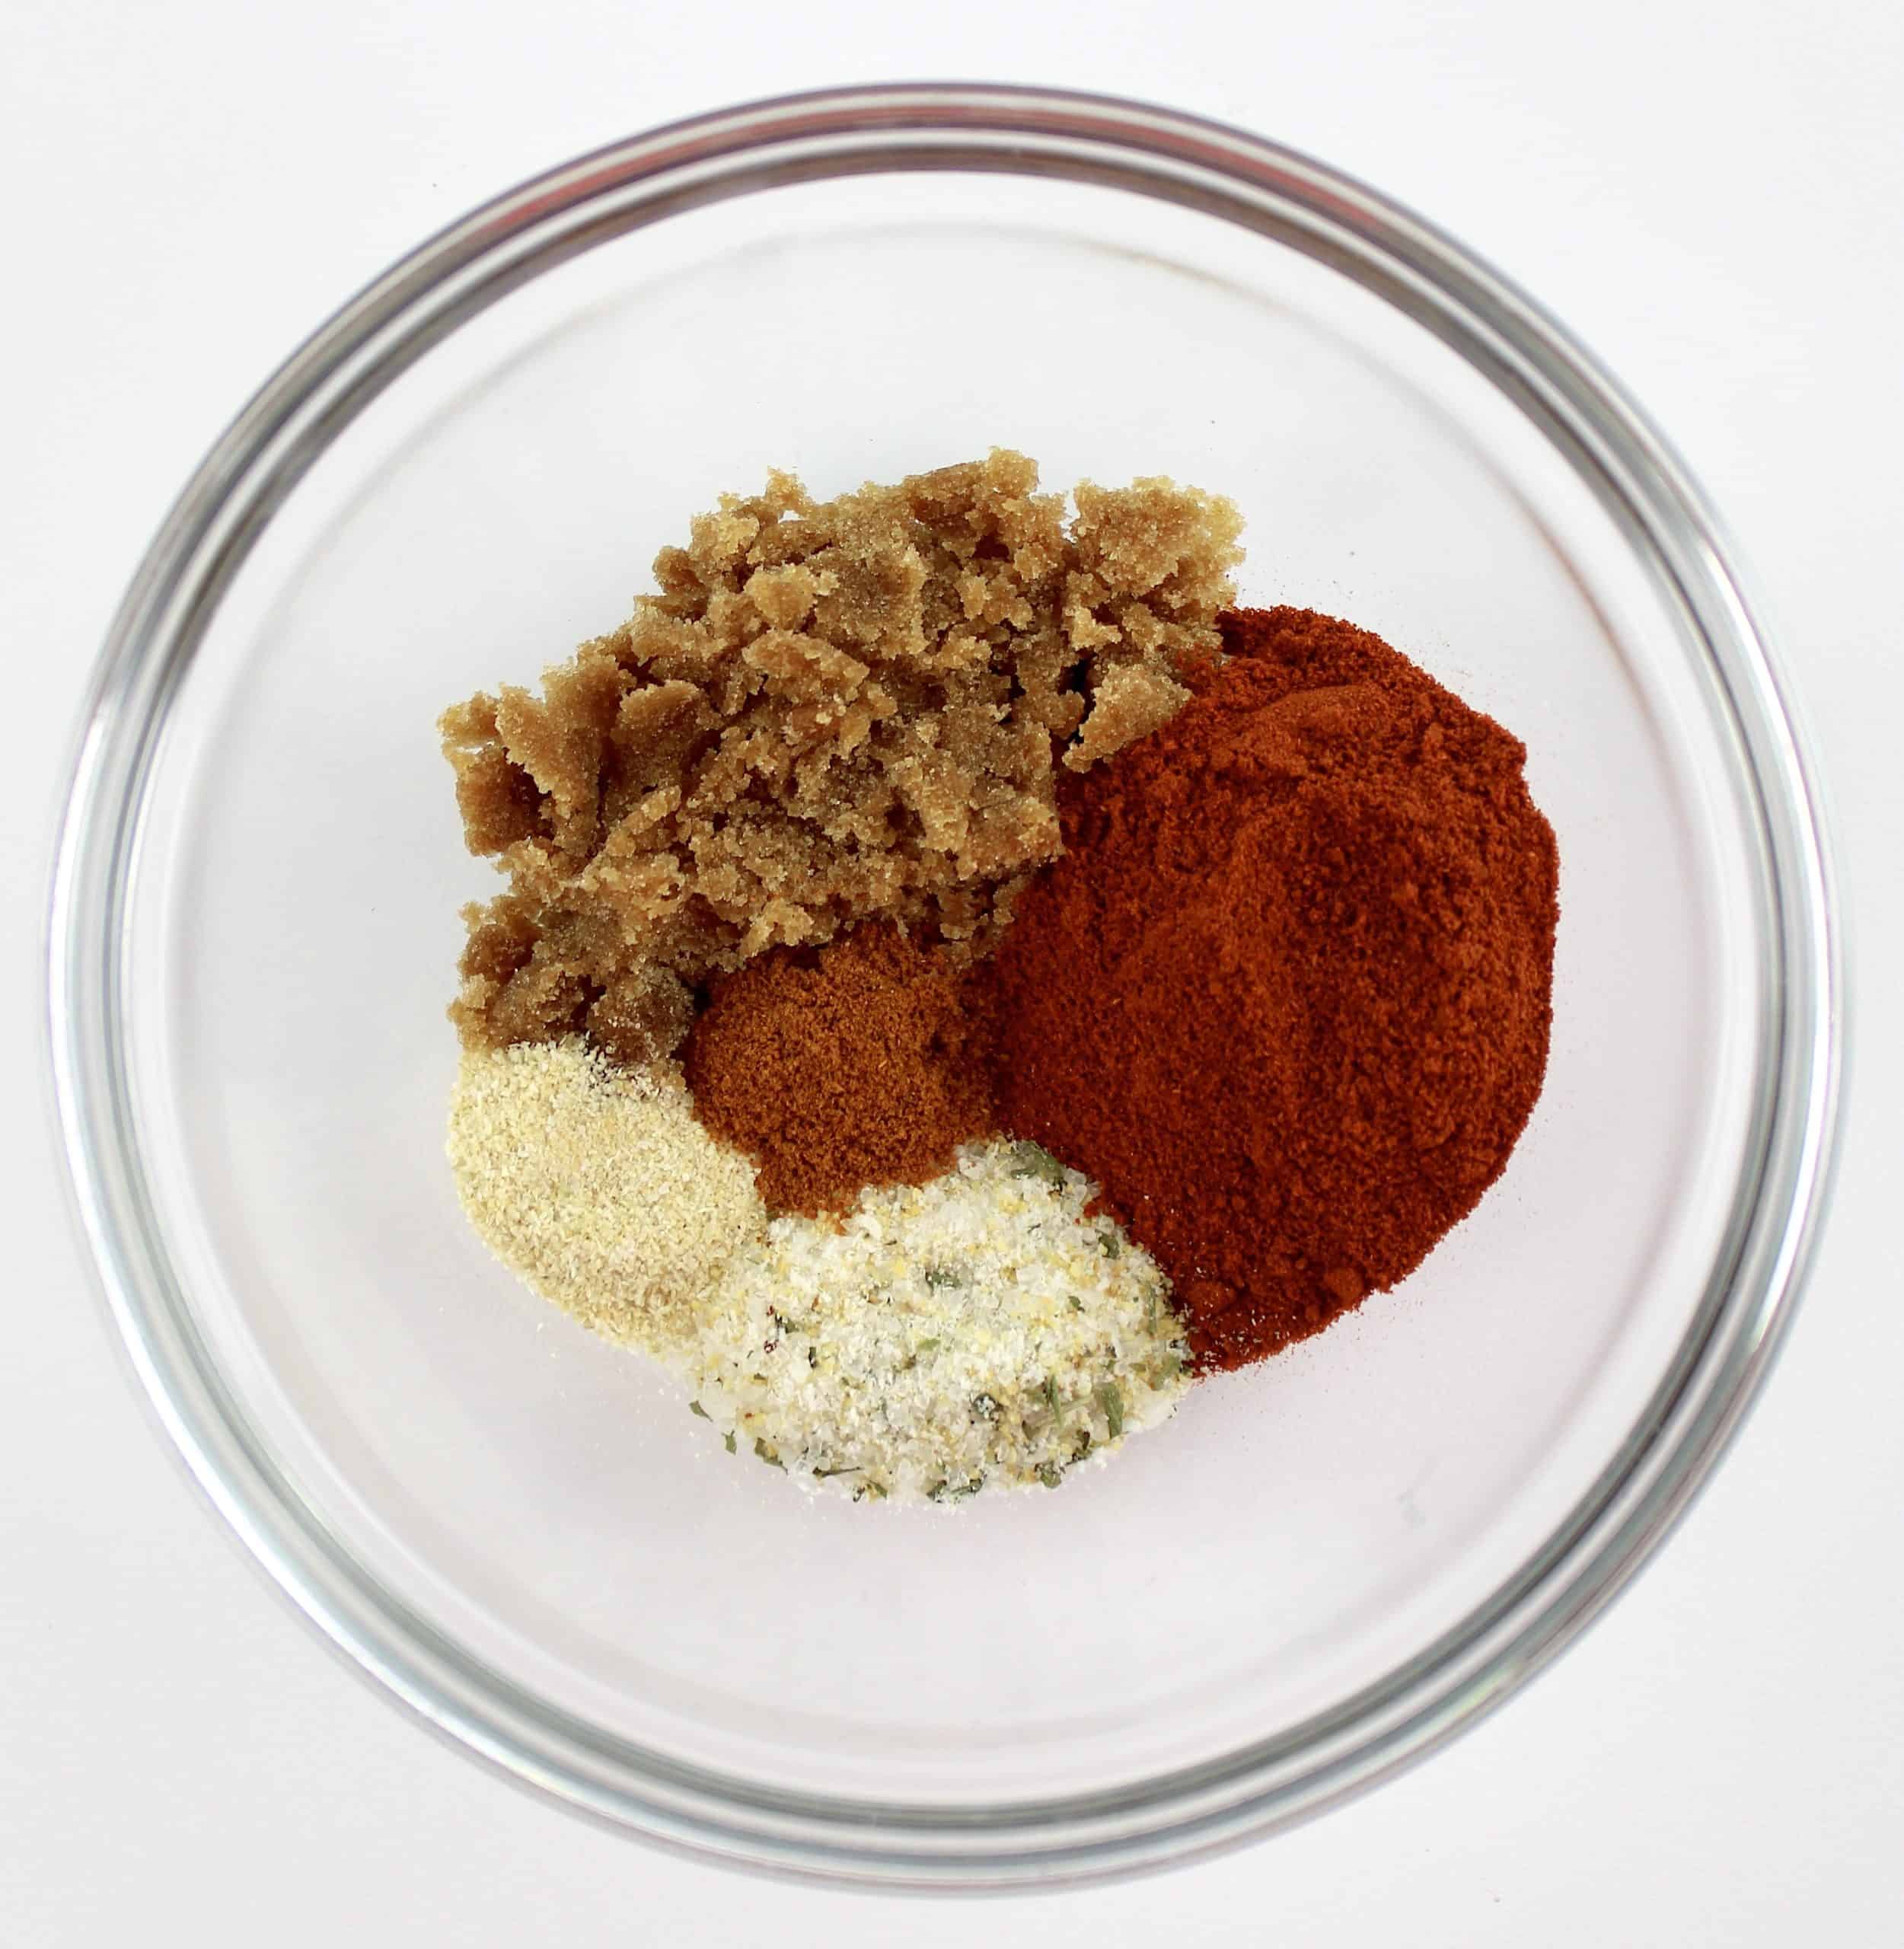 spices and brown sweetener in glass bowl unmixed